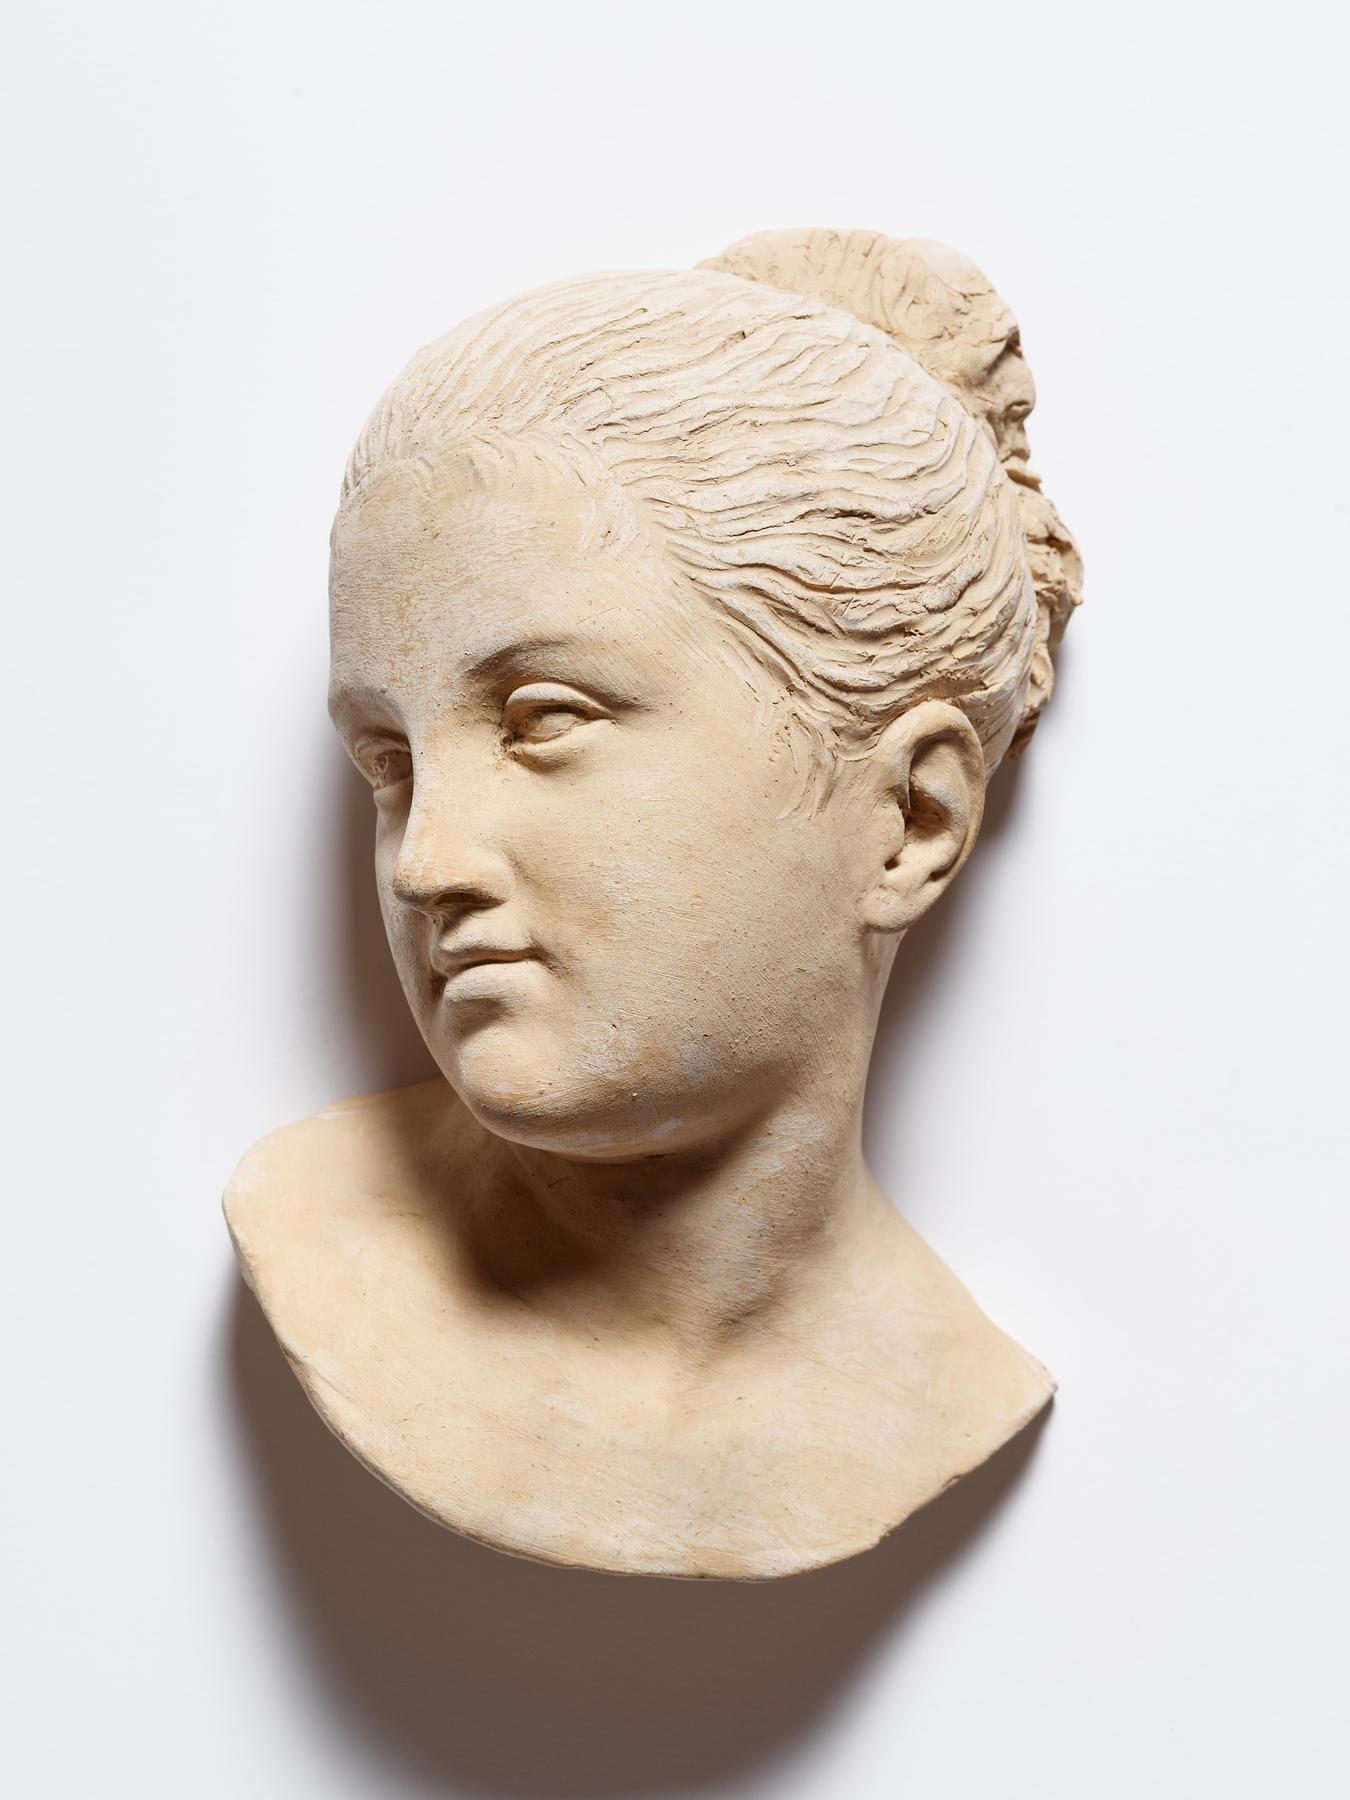 Head of Jeanina Stampe as Psyche, Nysø107